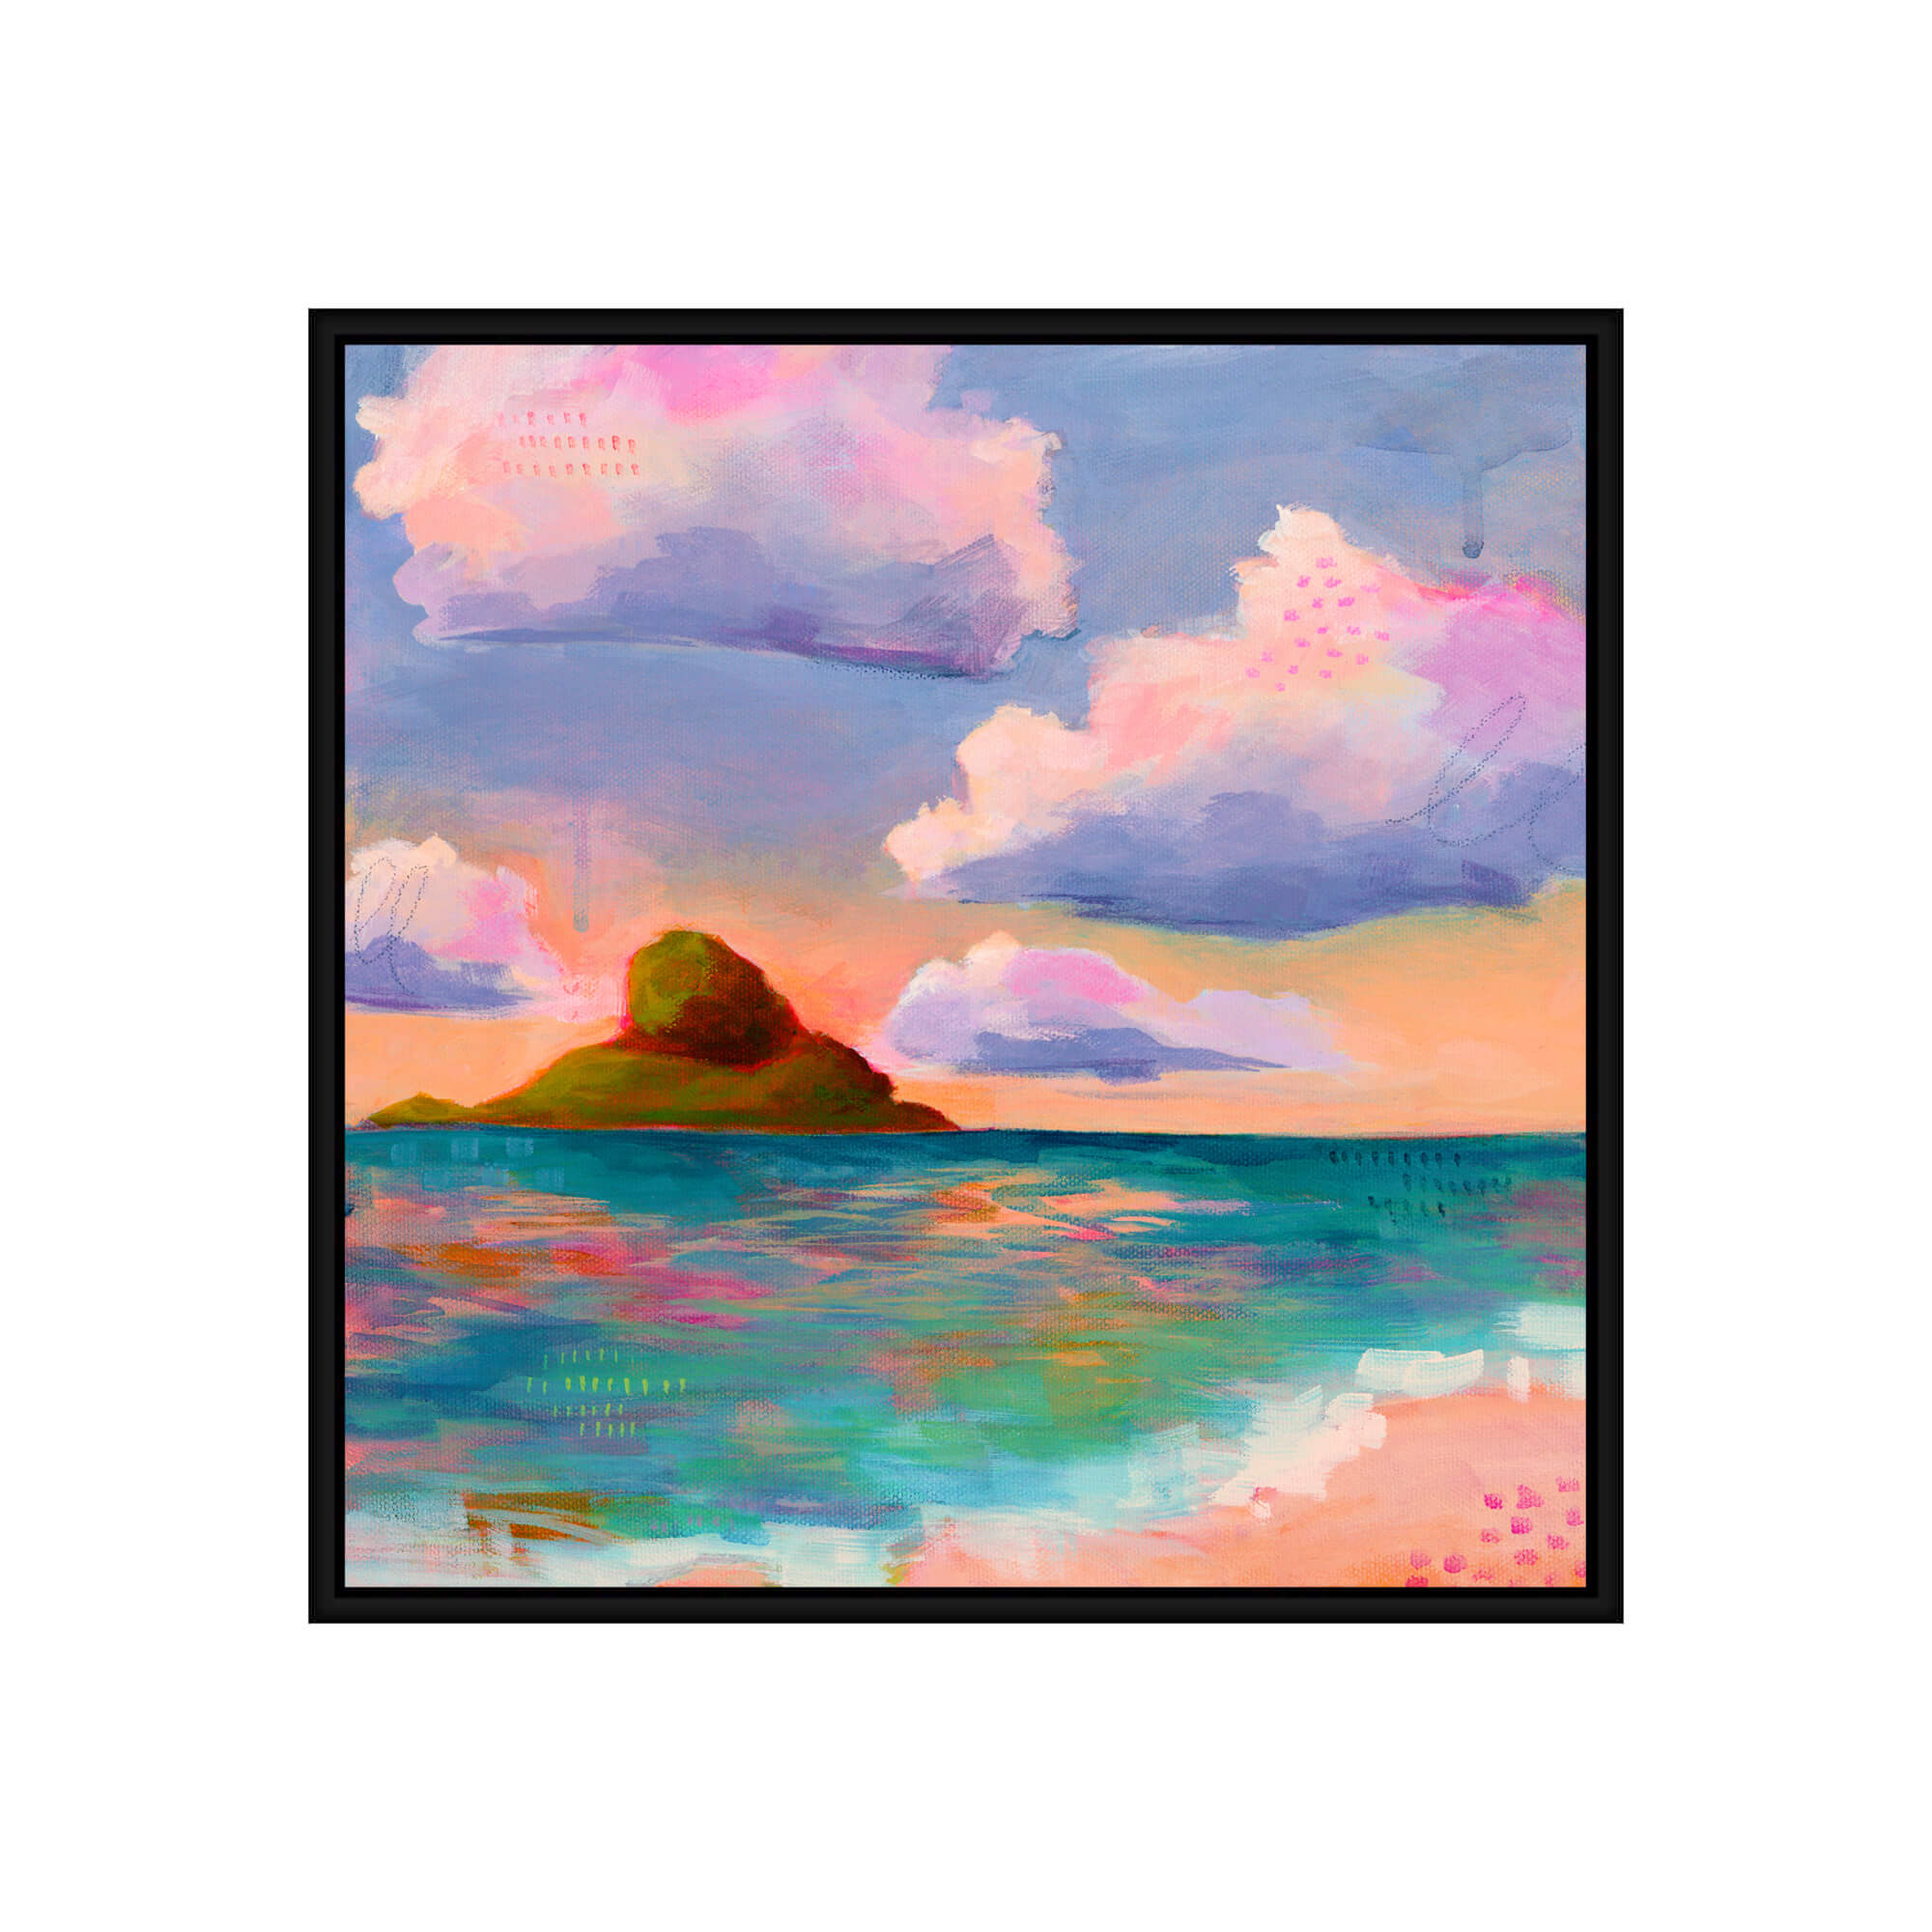 A colorful seascape by Hawaii artist Lindsay Wilkins